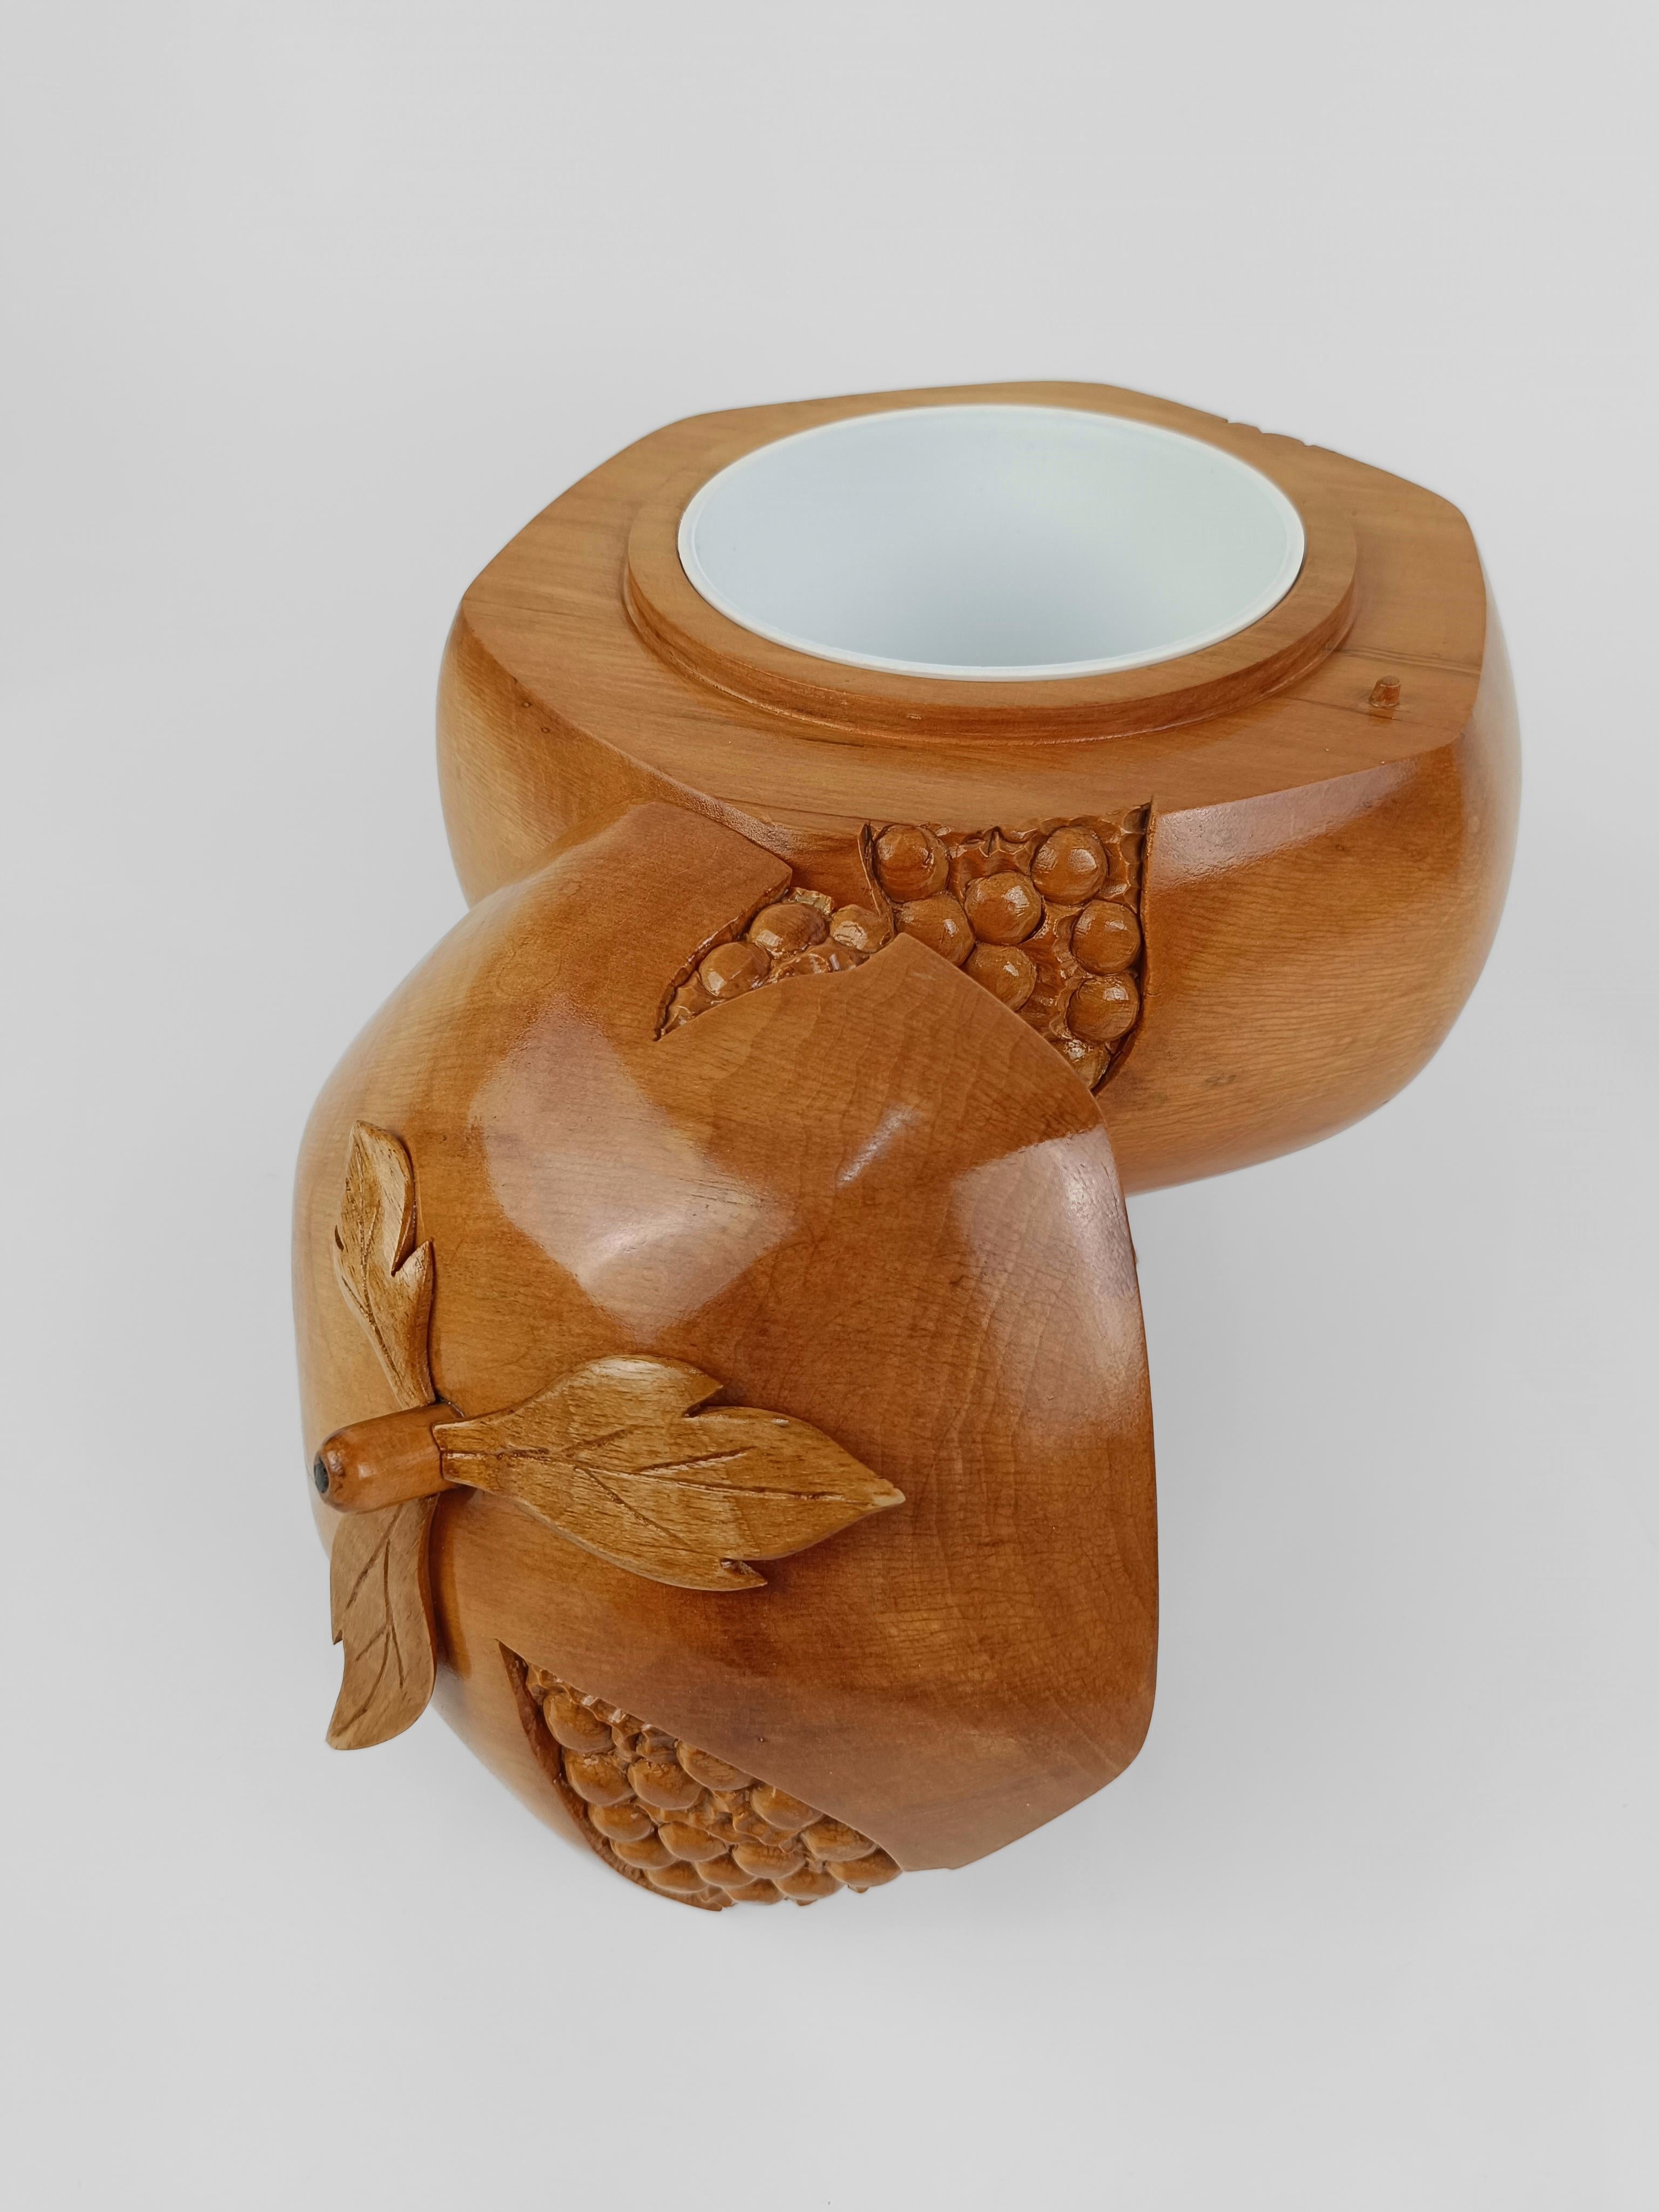 Sculptural Vintage Ice Bucket in maple wood carved in the shape of a pomegranate 7